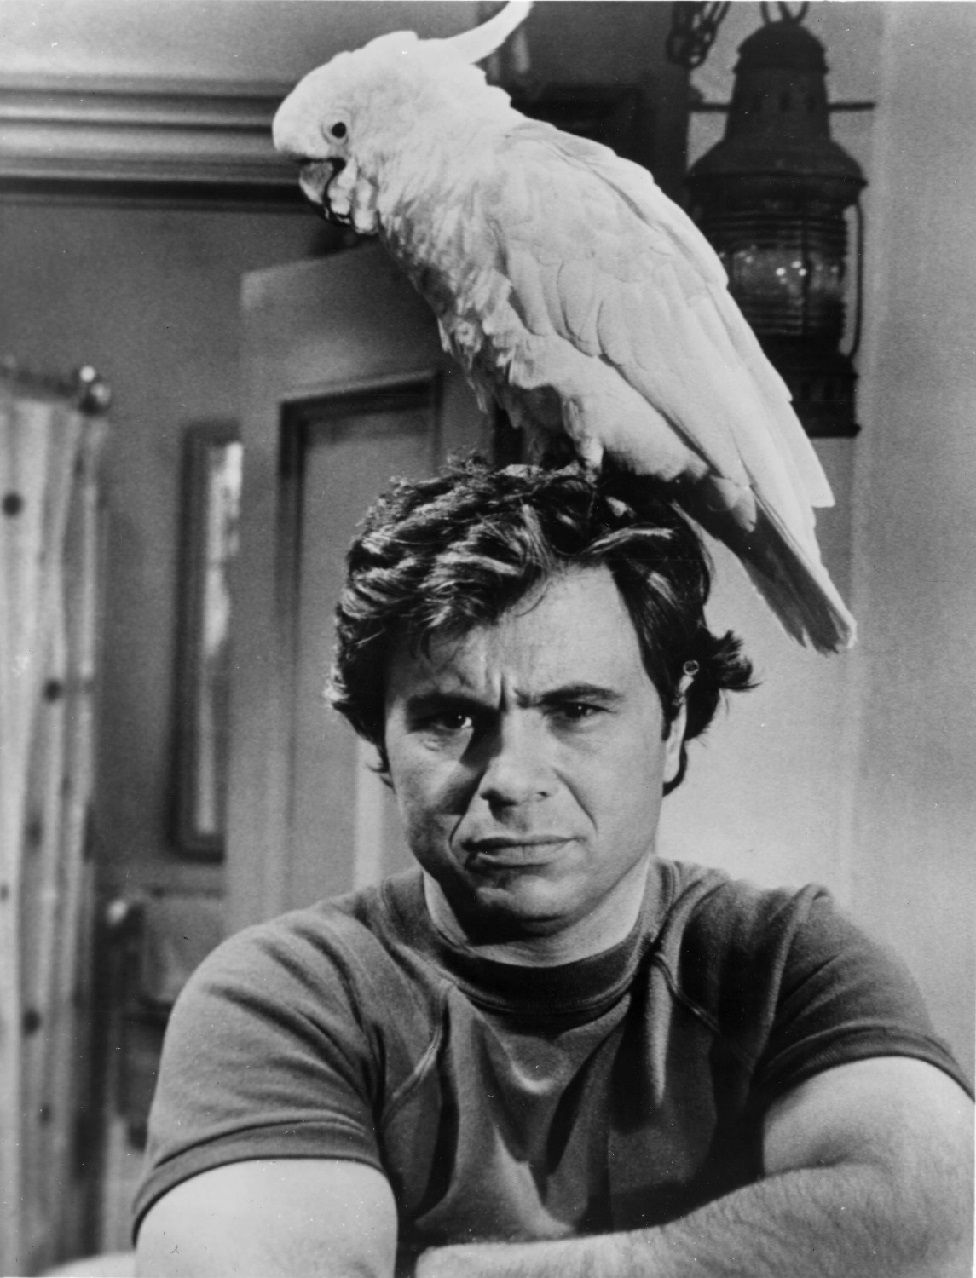 Actor Robert Blake stands with an exotic bird atop his head in a still from the TV crime series 'Baretta,' circa 1976.